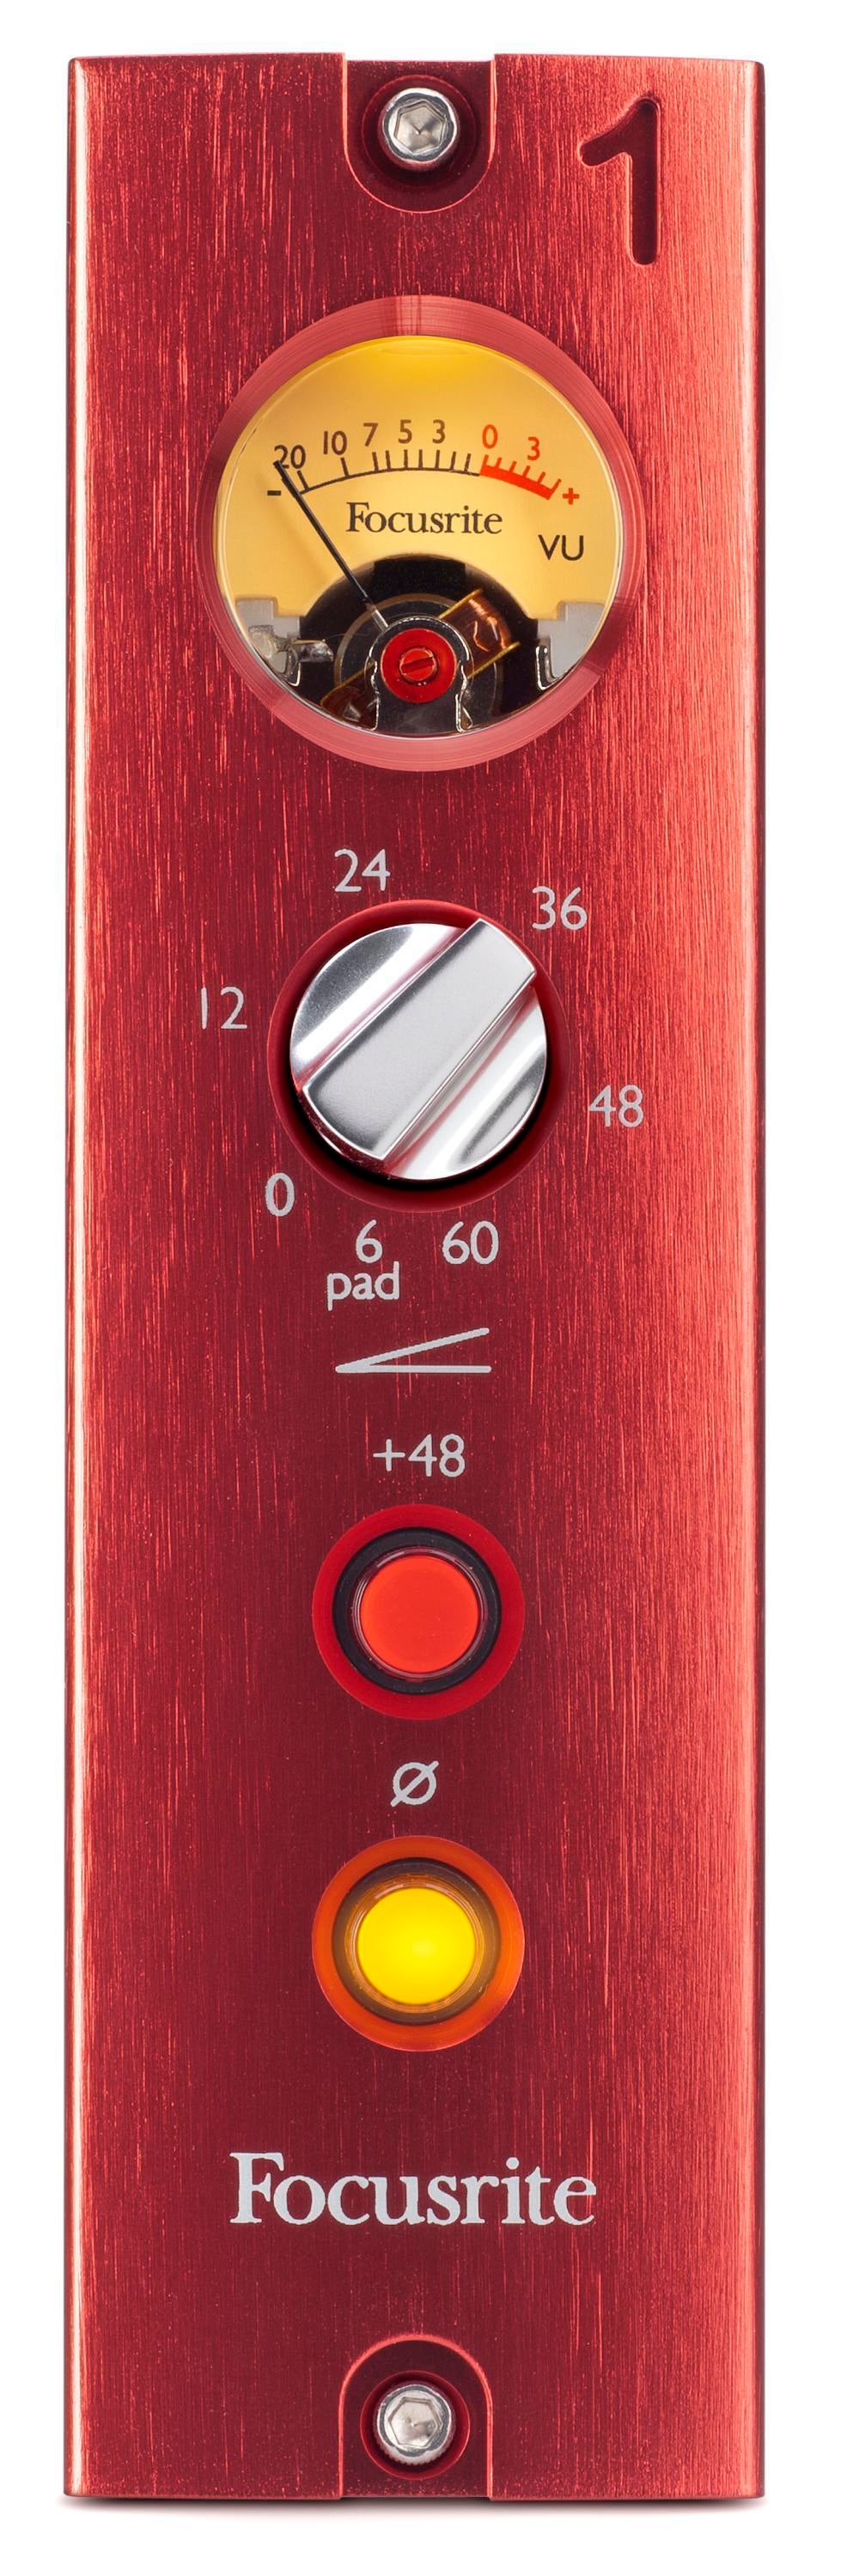 Focusrite Red 1 Microphone Preamp | Sweetwater